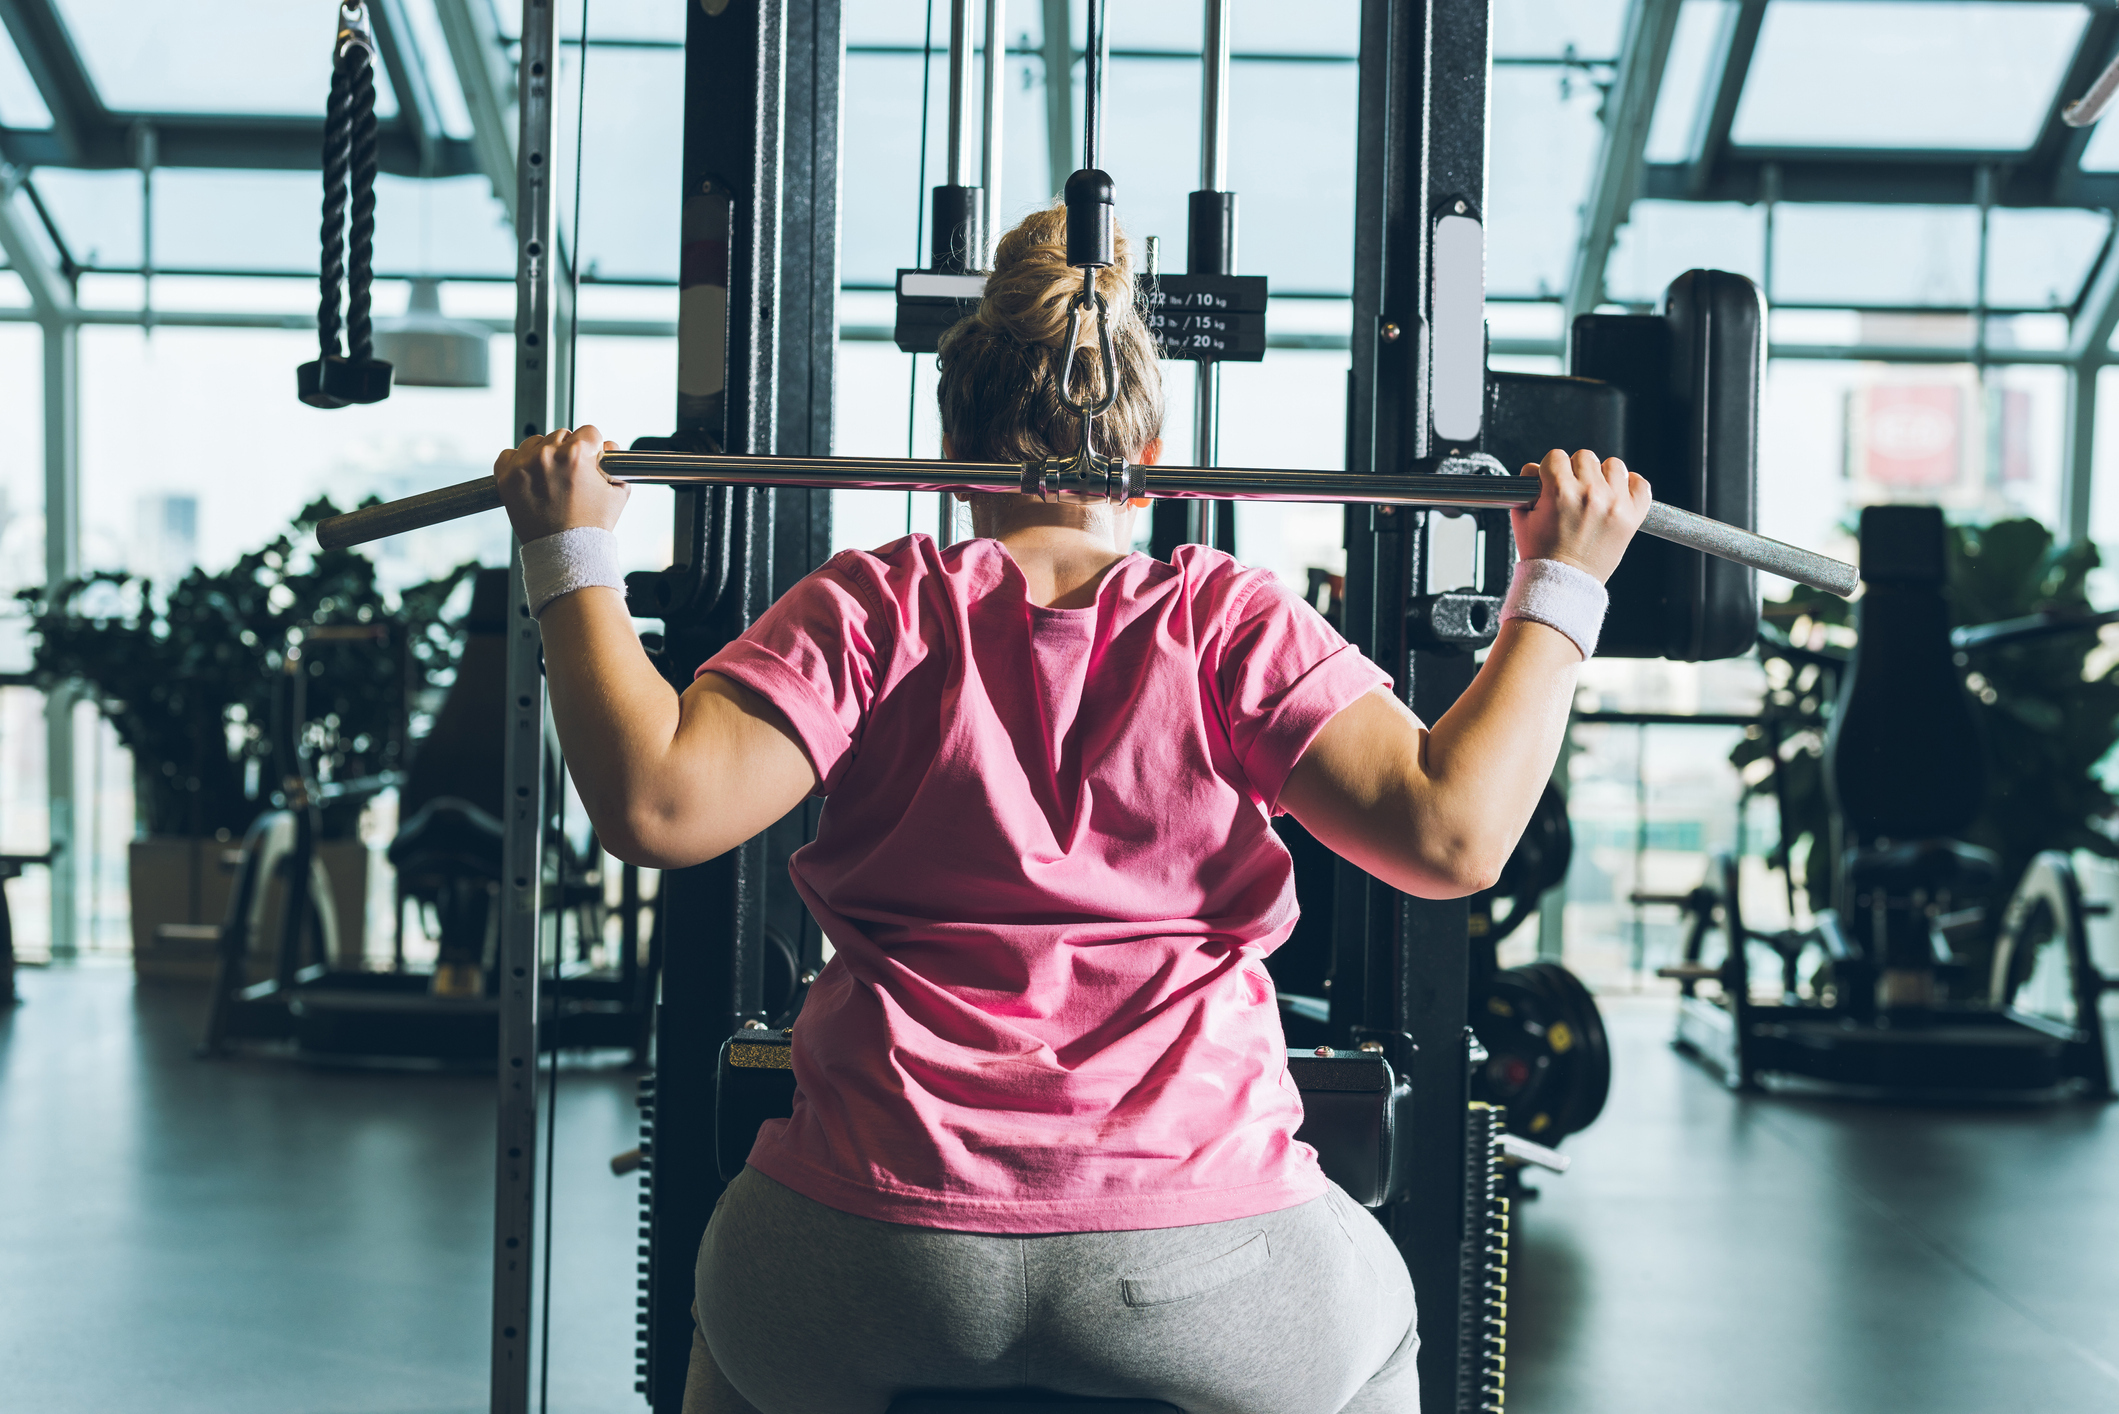 National report reveals growing consumer demand for gyms and leisure centres as ukactive calls for Government to slash health costs for NHS and business